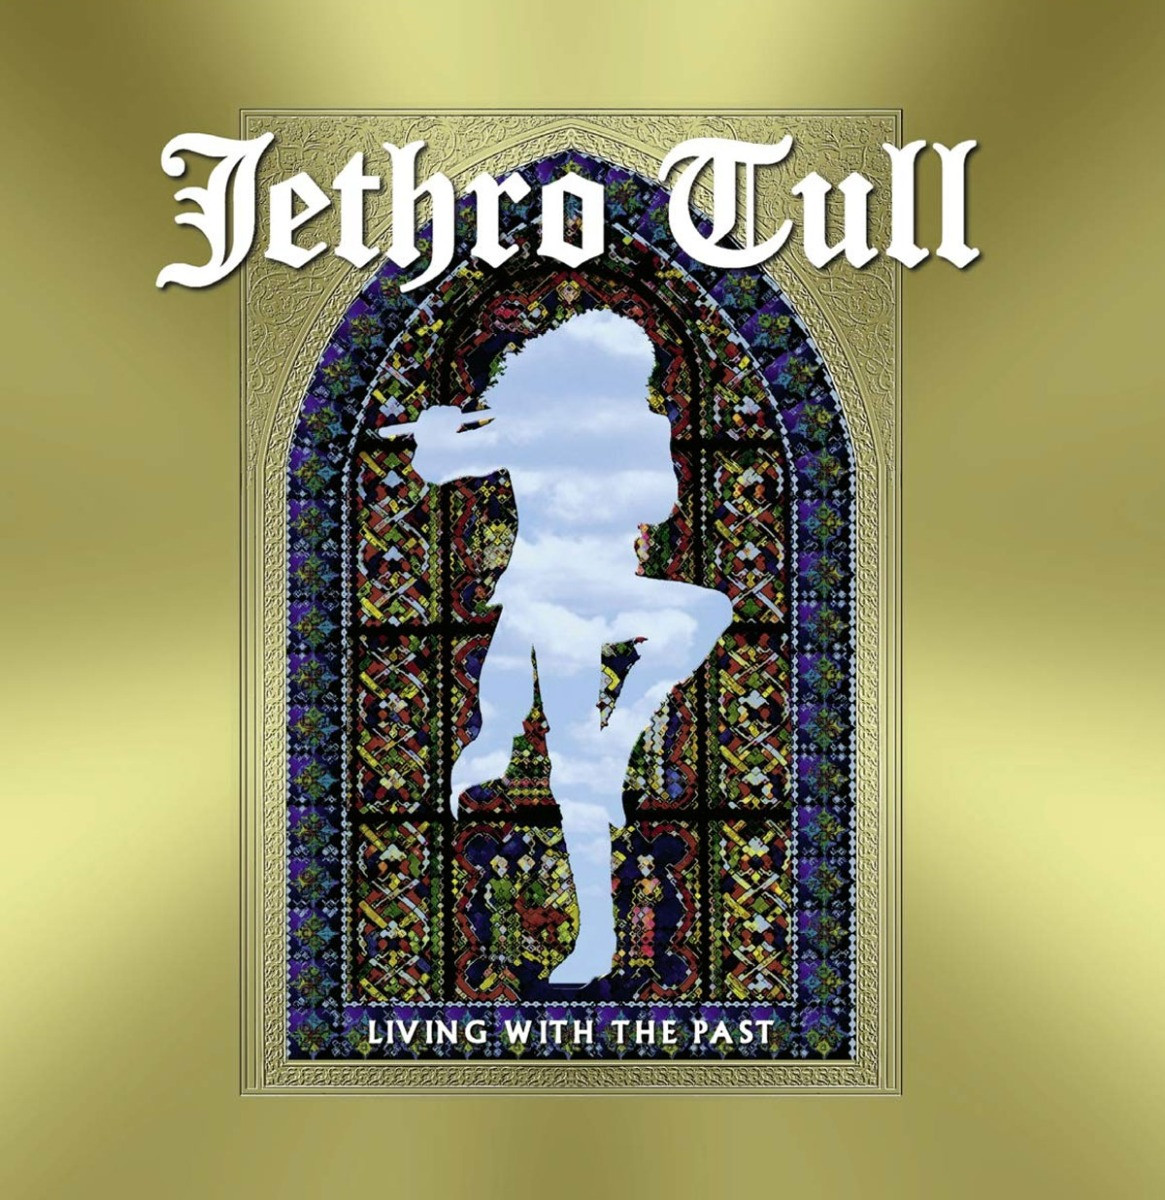 Jethro Tull - Living With The Past LP + CD - Limited Edition